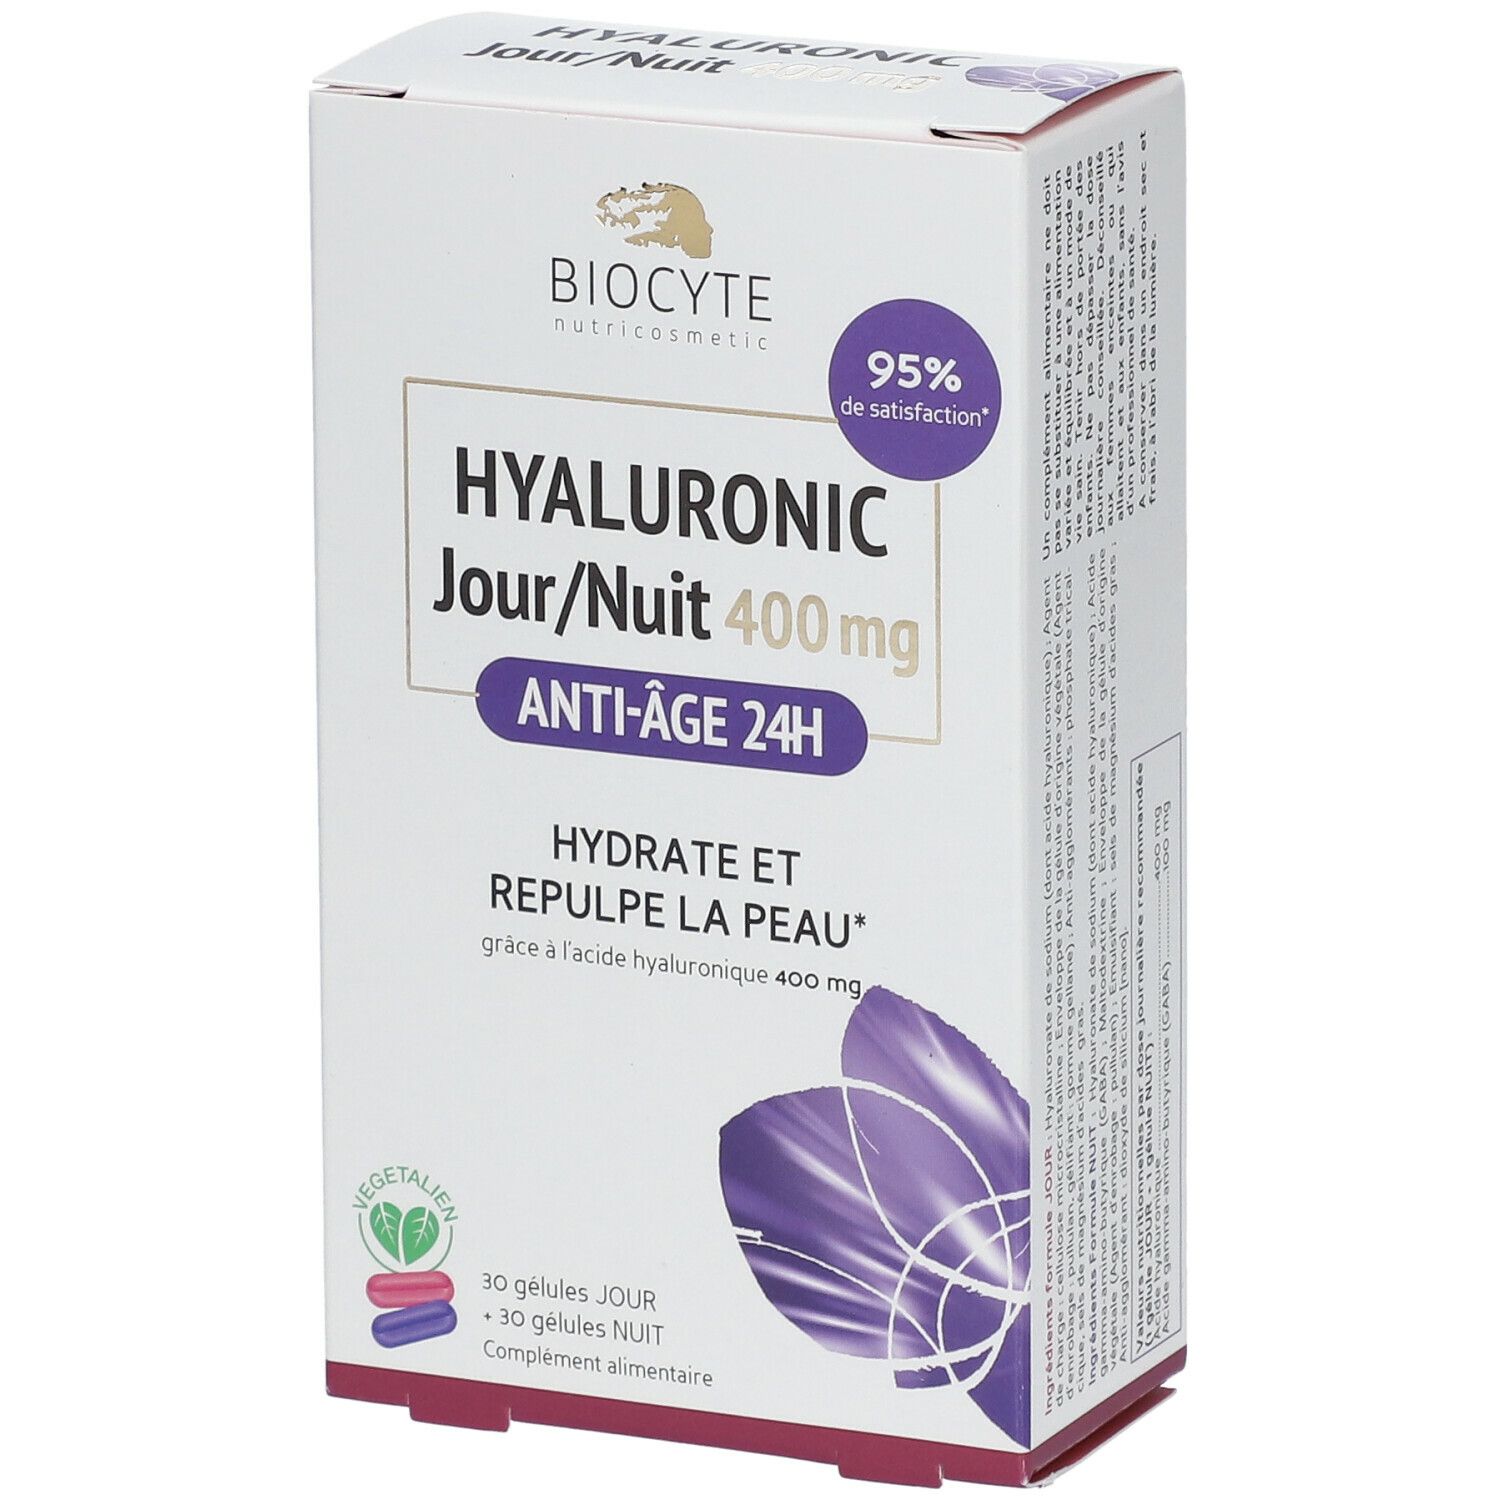 Biocyte Hyaluronic jour/nuit 400 mg